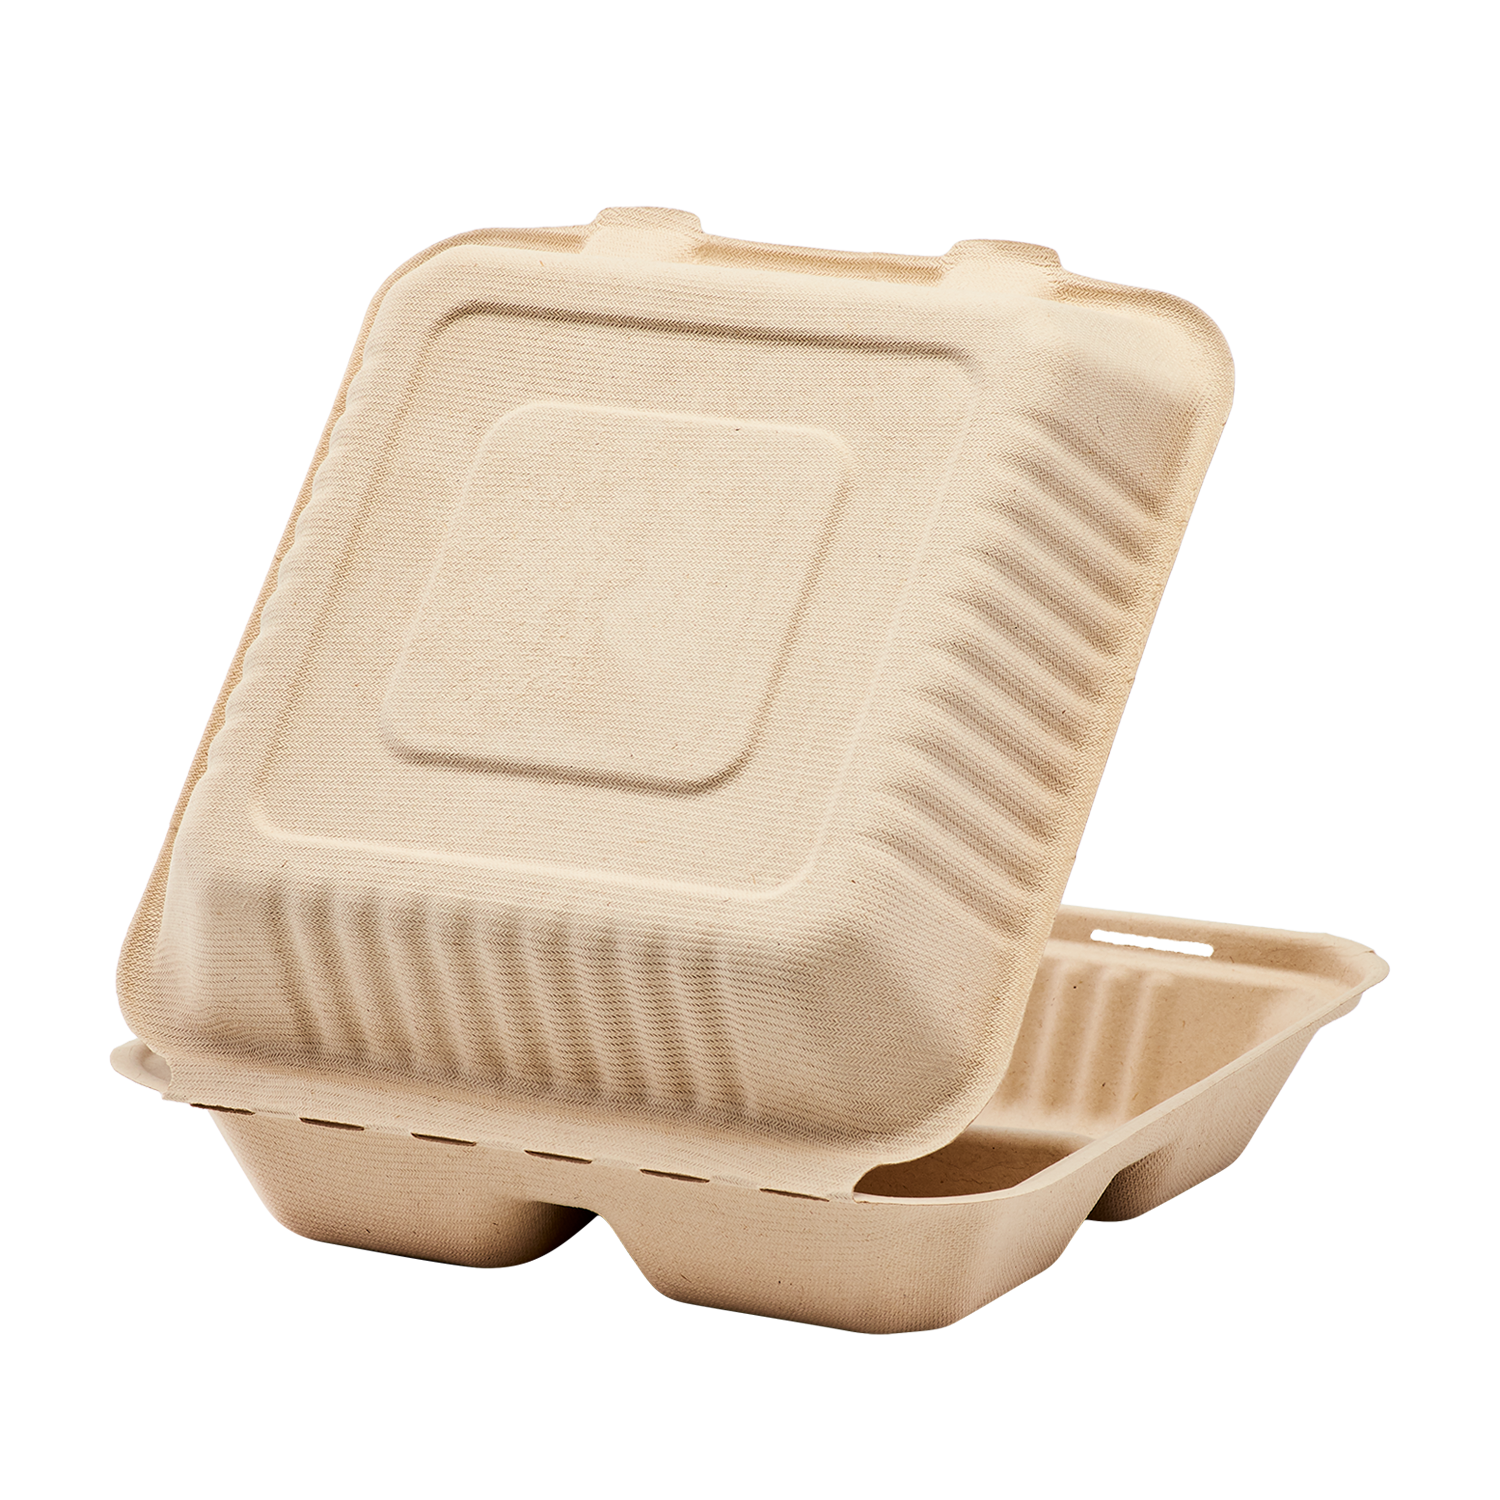 3-Compartment Disposable Plastic food trays, takeaway containers